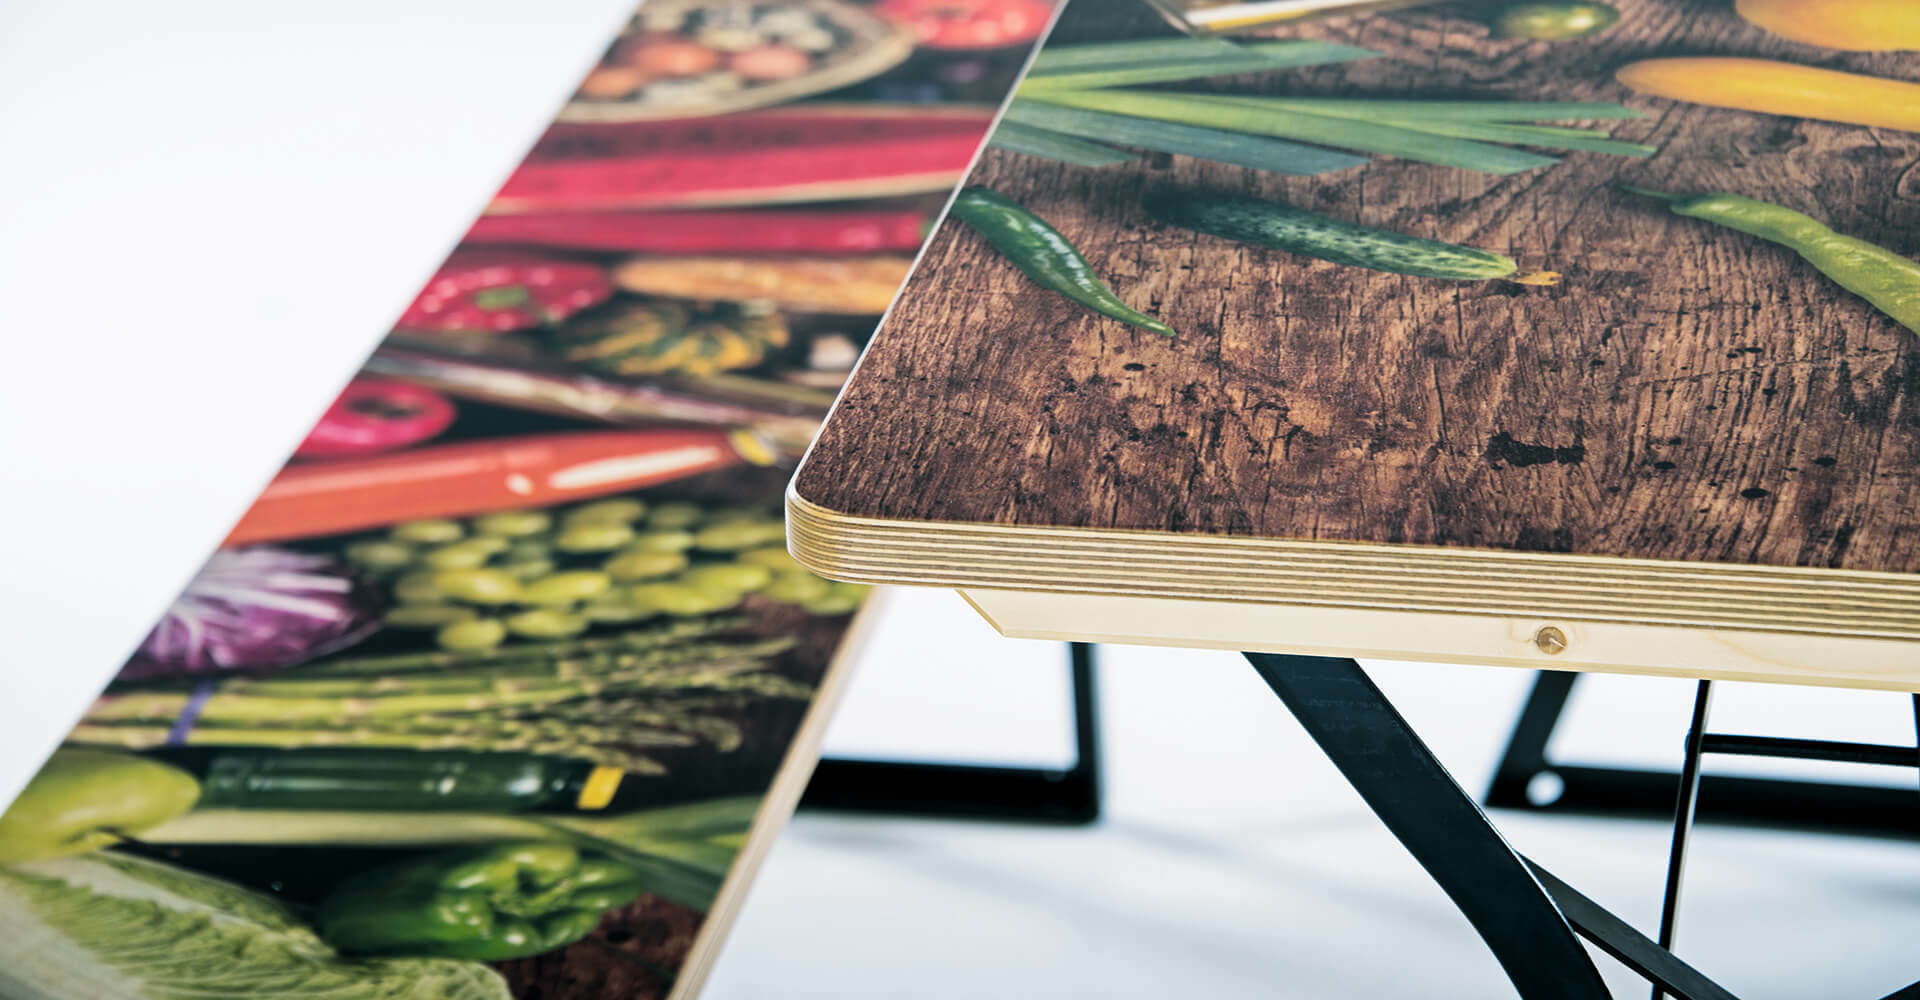 The beer table from RUKU1952 was fully printed with food in the digital printing process; the print in the background is printed in the same way as the beer bench in wood look.